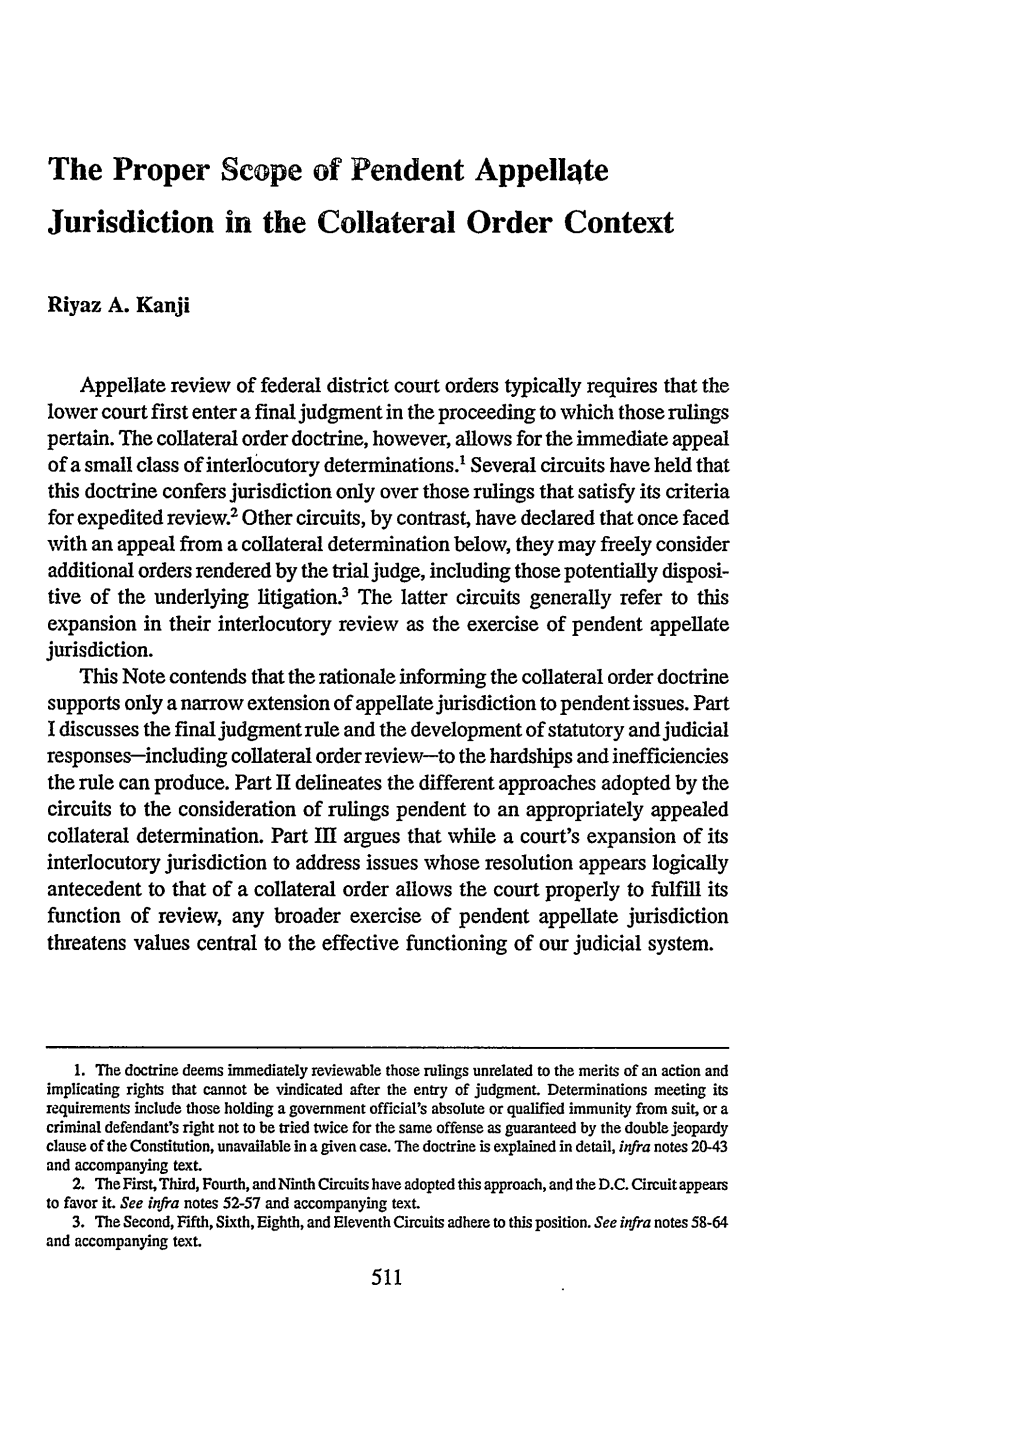 The Proper Scope of Pendent Appellate Jurisdiction in the Collateral Order Context